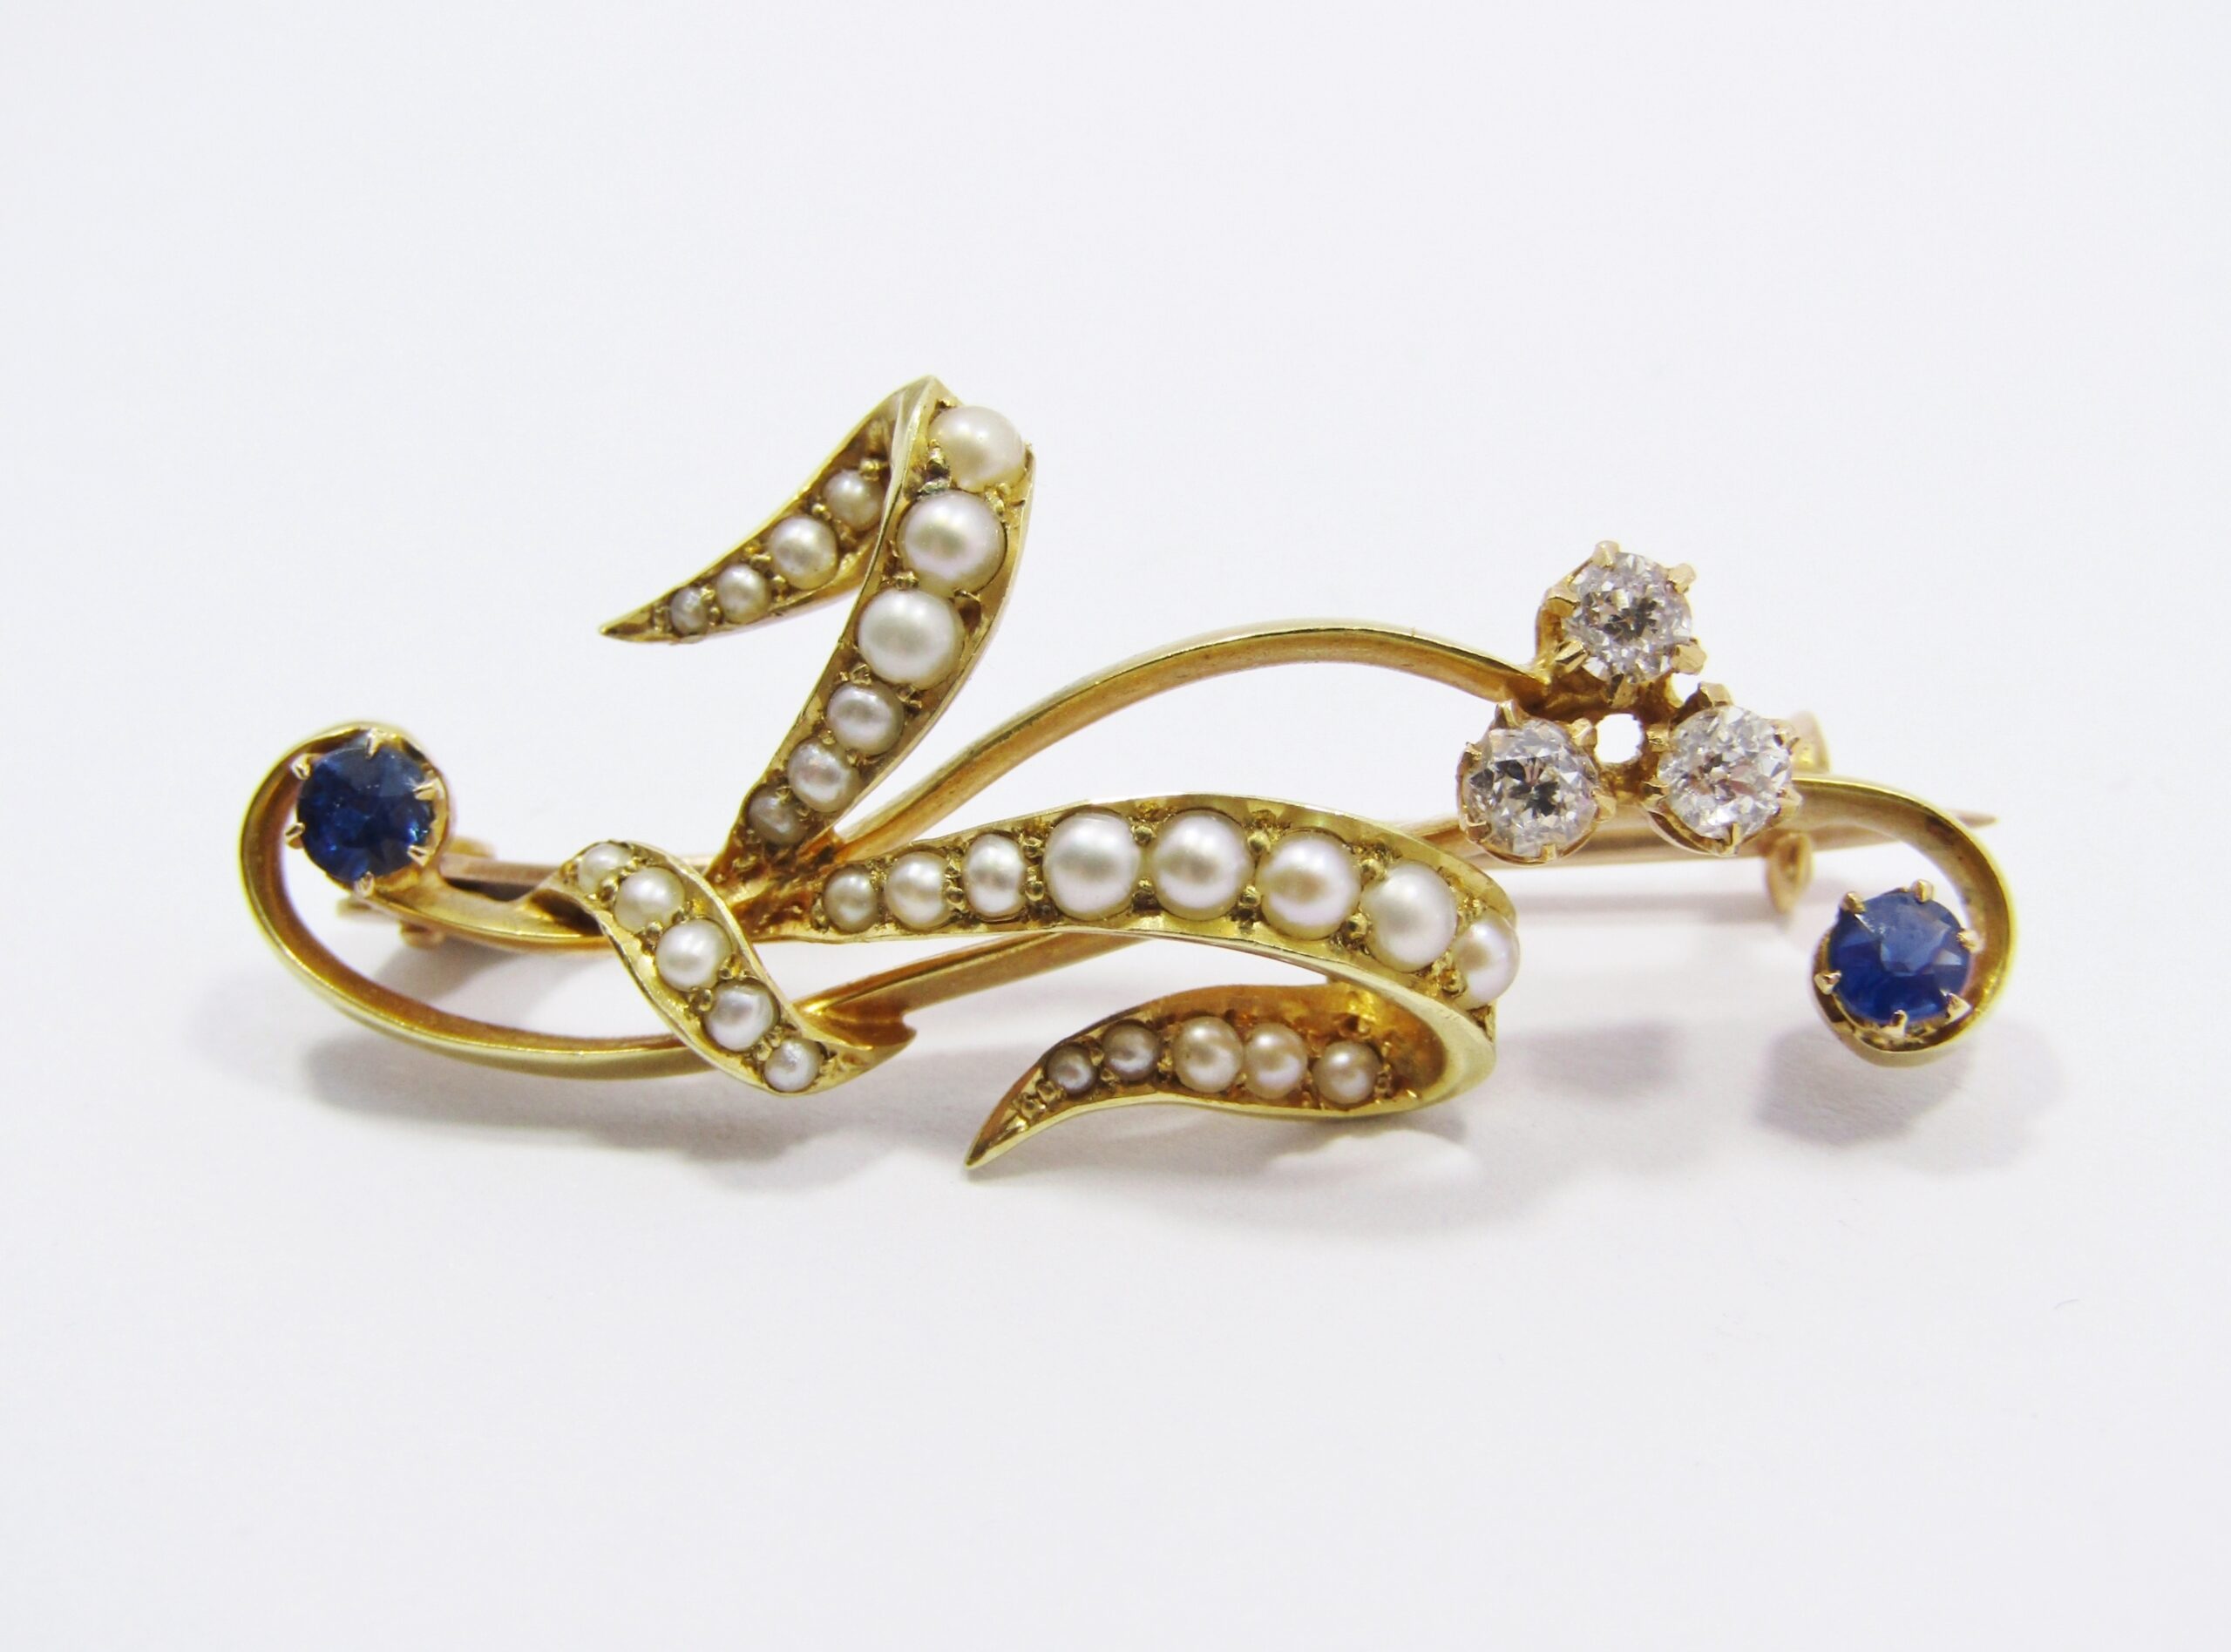 A Gorgeous Late Victorian Sapphire, Diamond and Seed Pearl Brooch In 9ct Gold